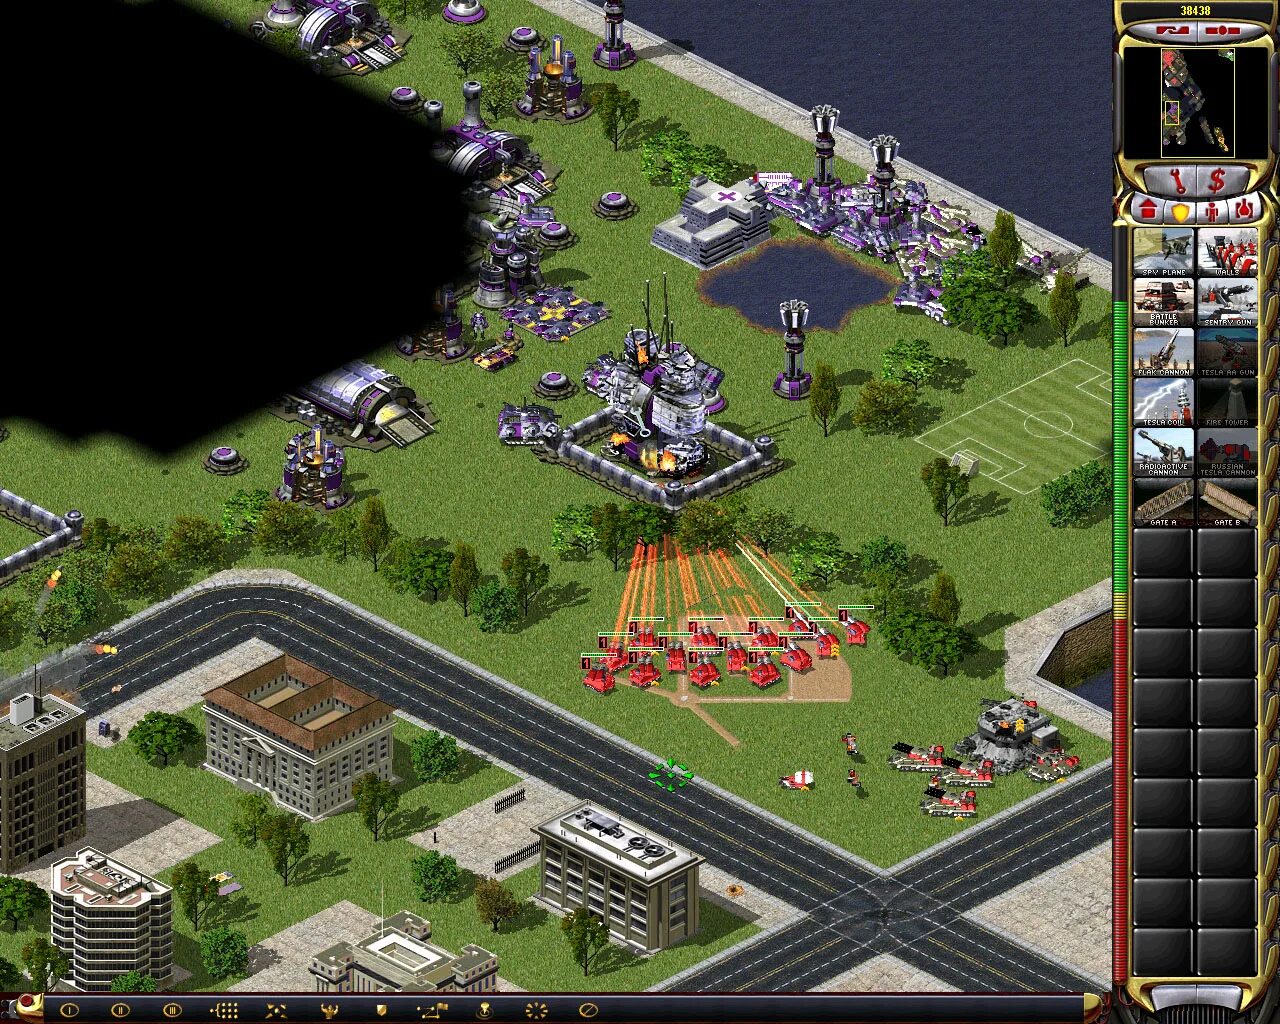 Red Alert 2. Command & Conquer: Red Alert 2. Command & Conquer: Red Alert 2 - Yuri's Revenge. Red Alert 2 Yuri's Revenge. Command conquer revenge